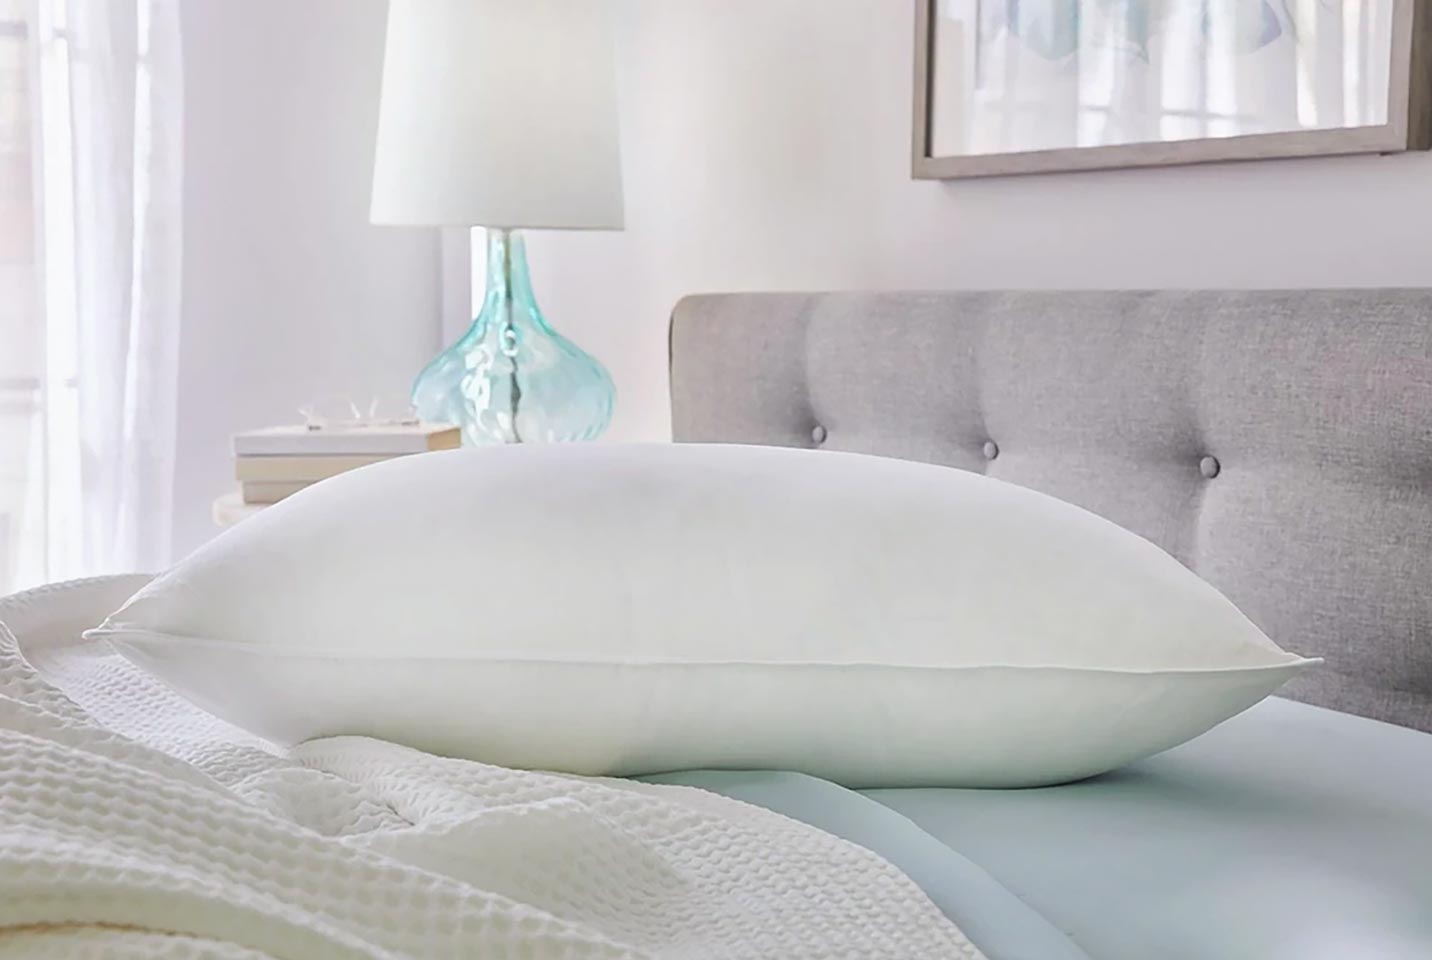 Feather & Down Pillow  Shop Exclusive EDITION Pillows, Bedding Sets,  Throws, and More